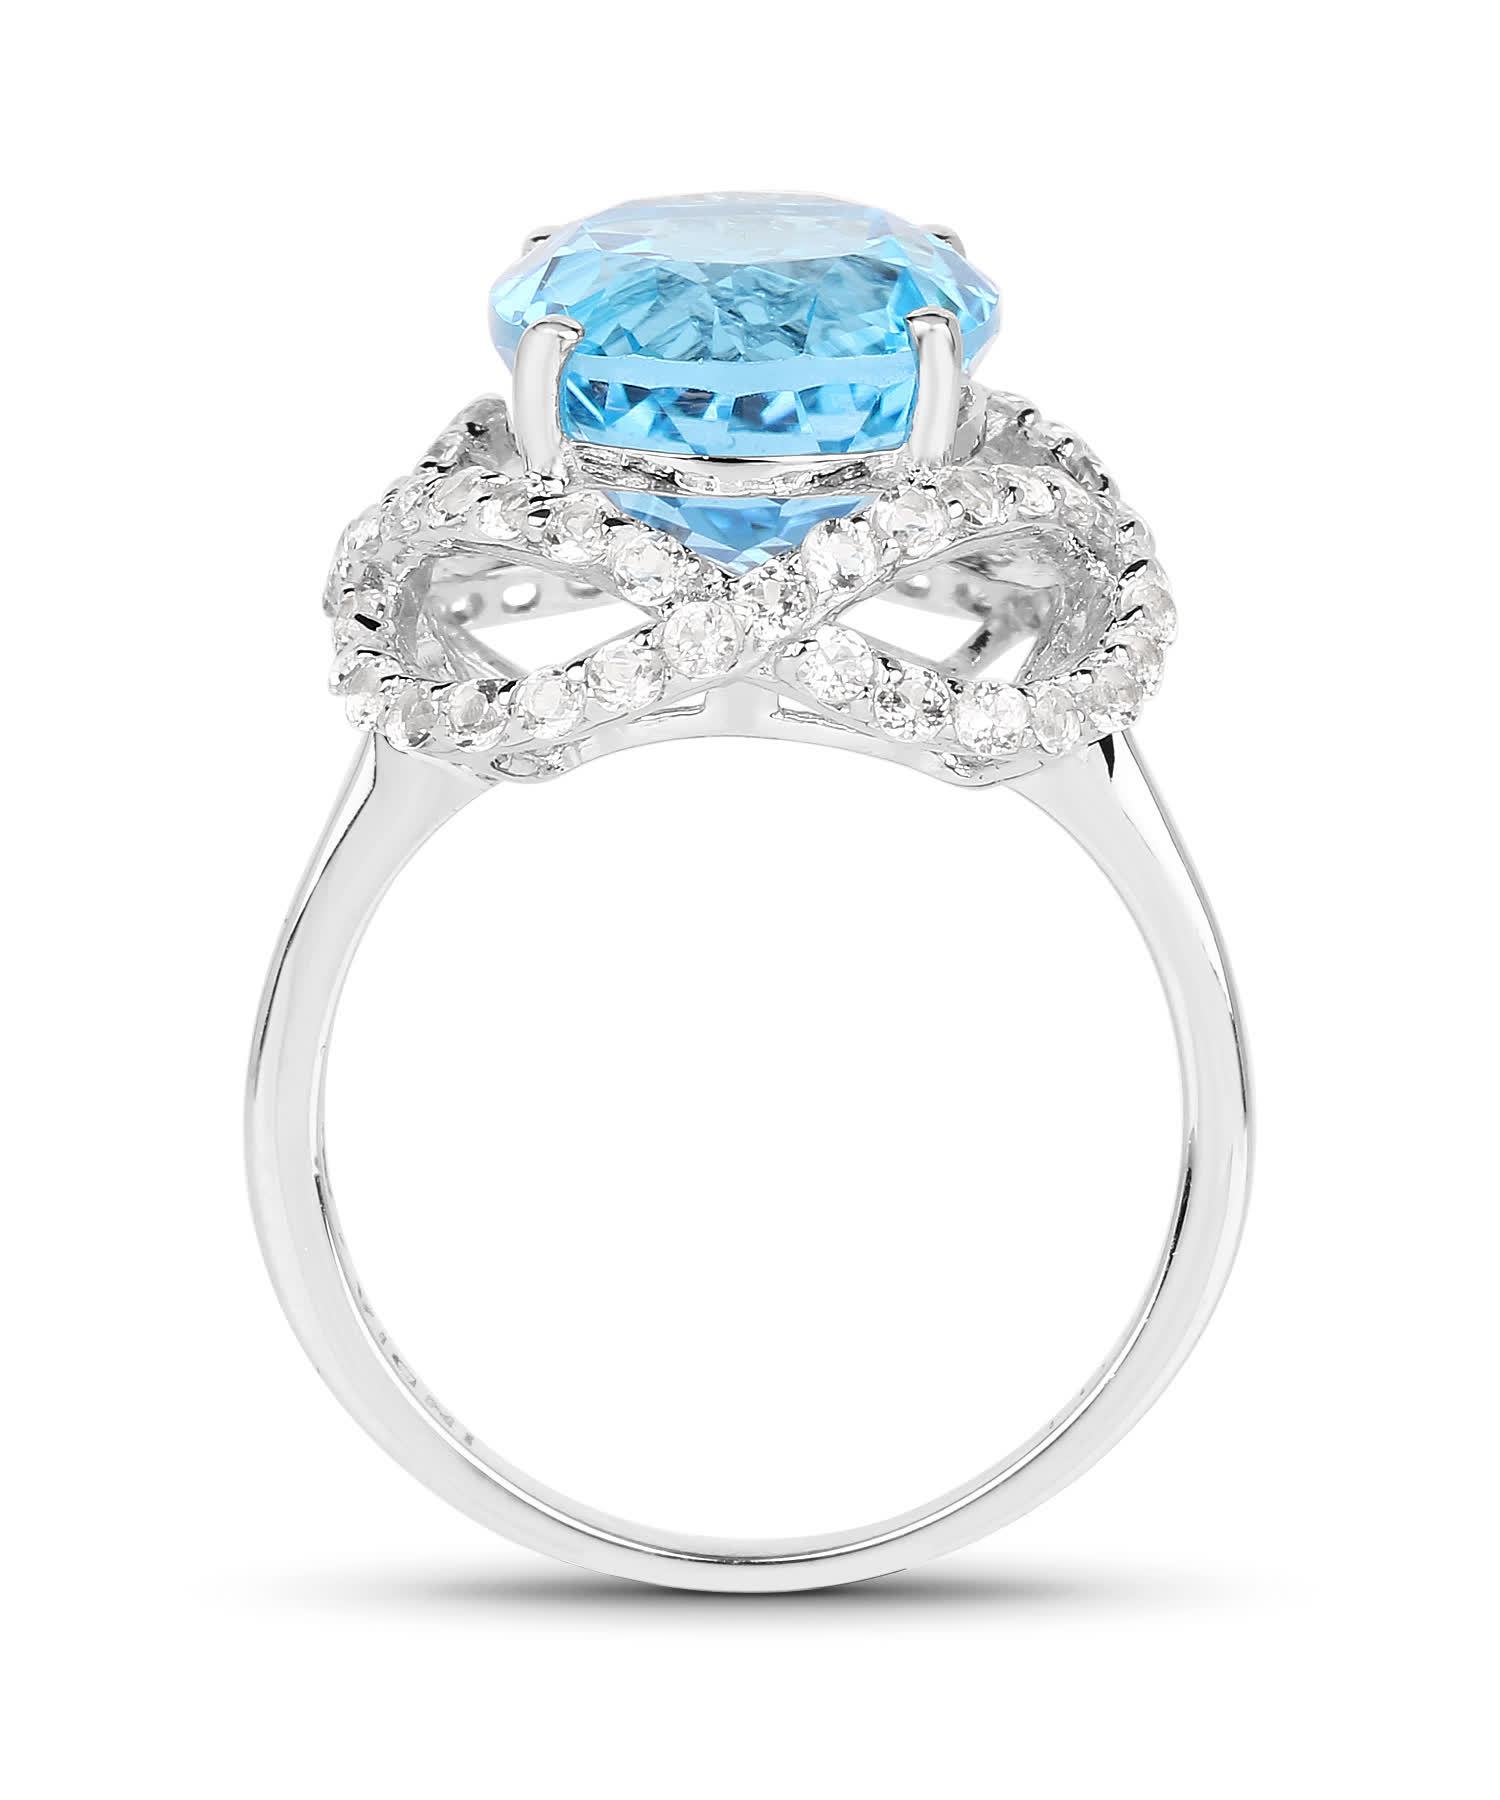 7.32ctw Natural Swiss Blue Topaz Rhodium Plated 925 Sterling Silver Cocktail Ring View 2